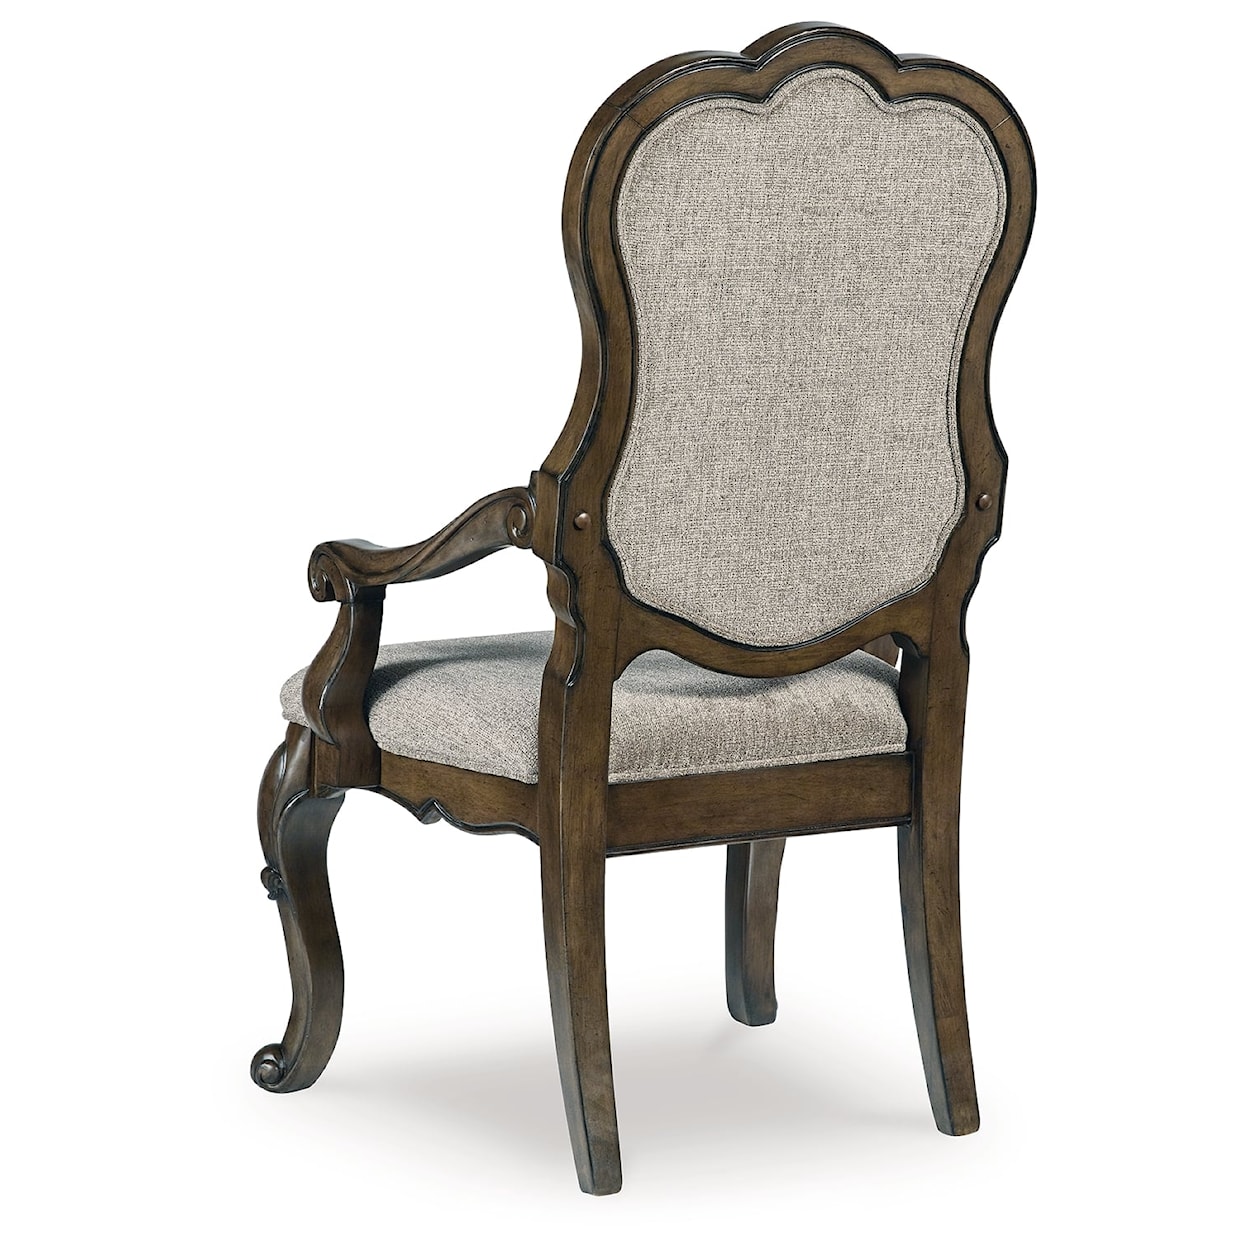 Signature Design by Ashley Maylee Dining Upholstered Arm Chair